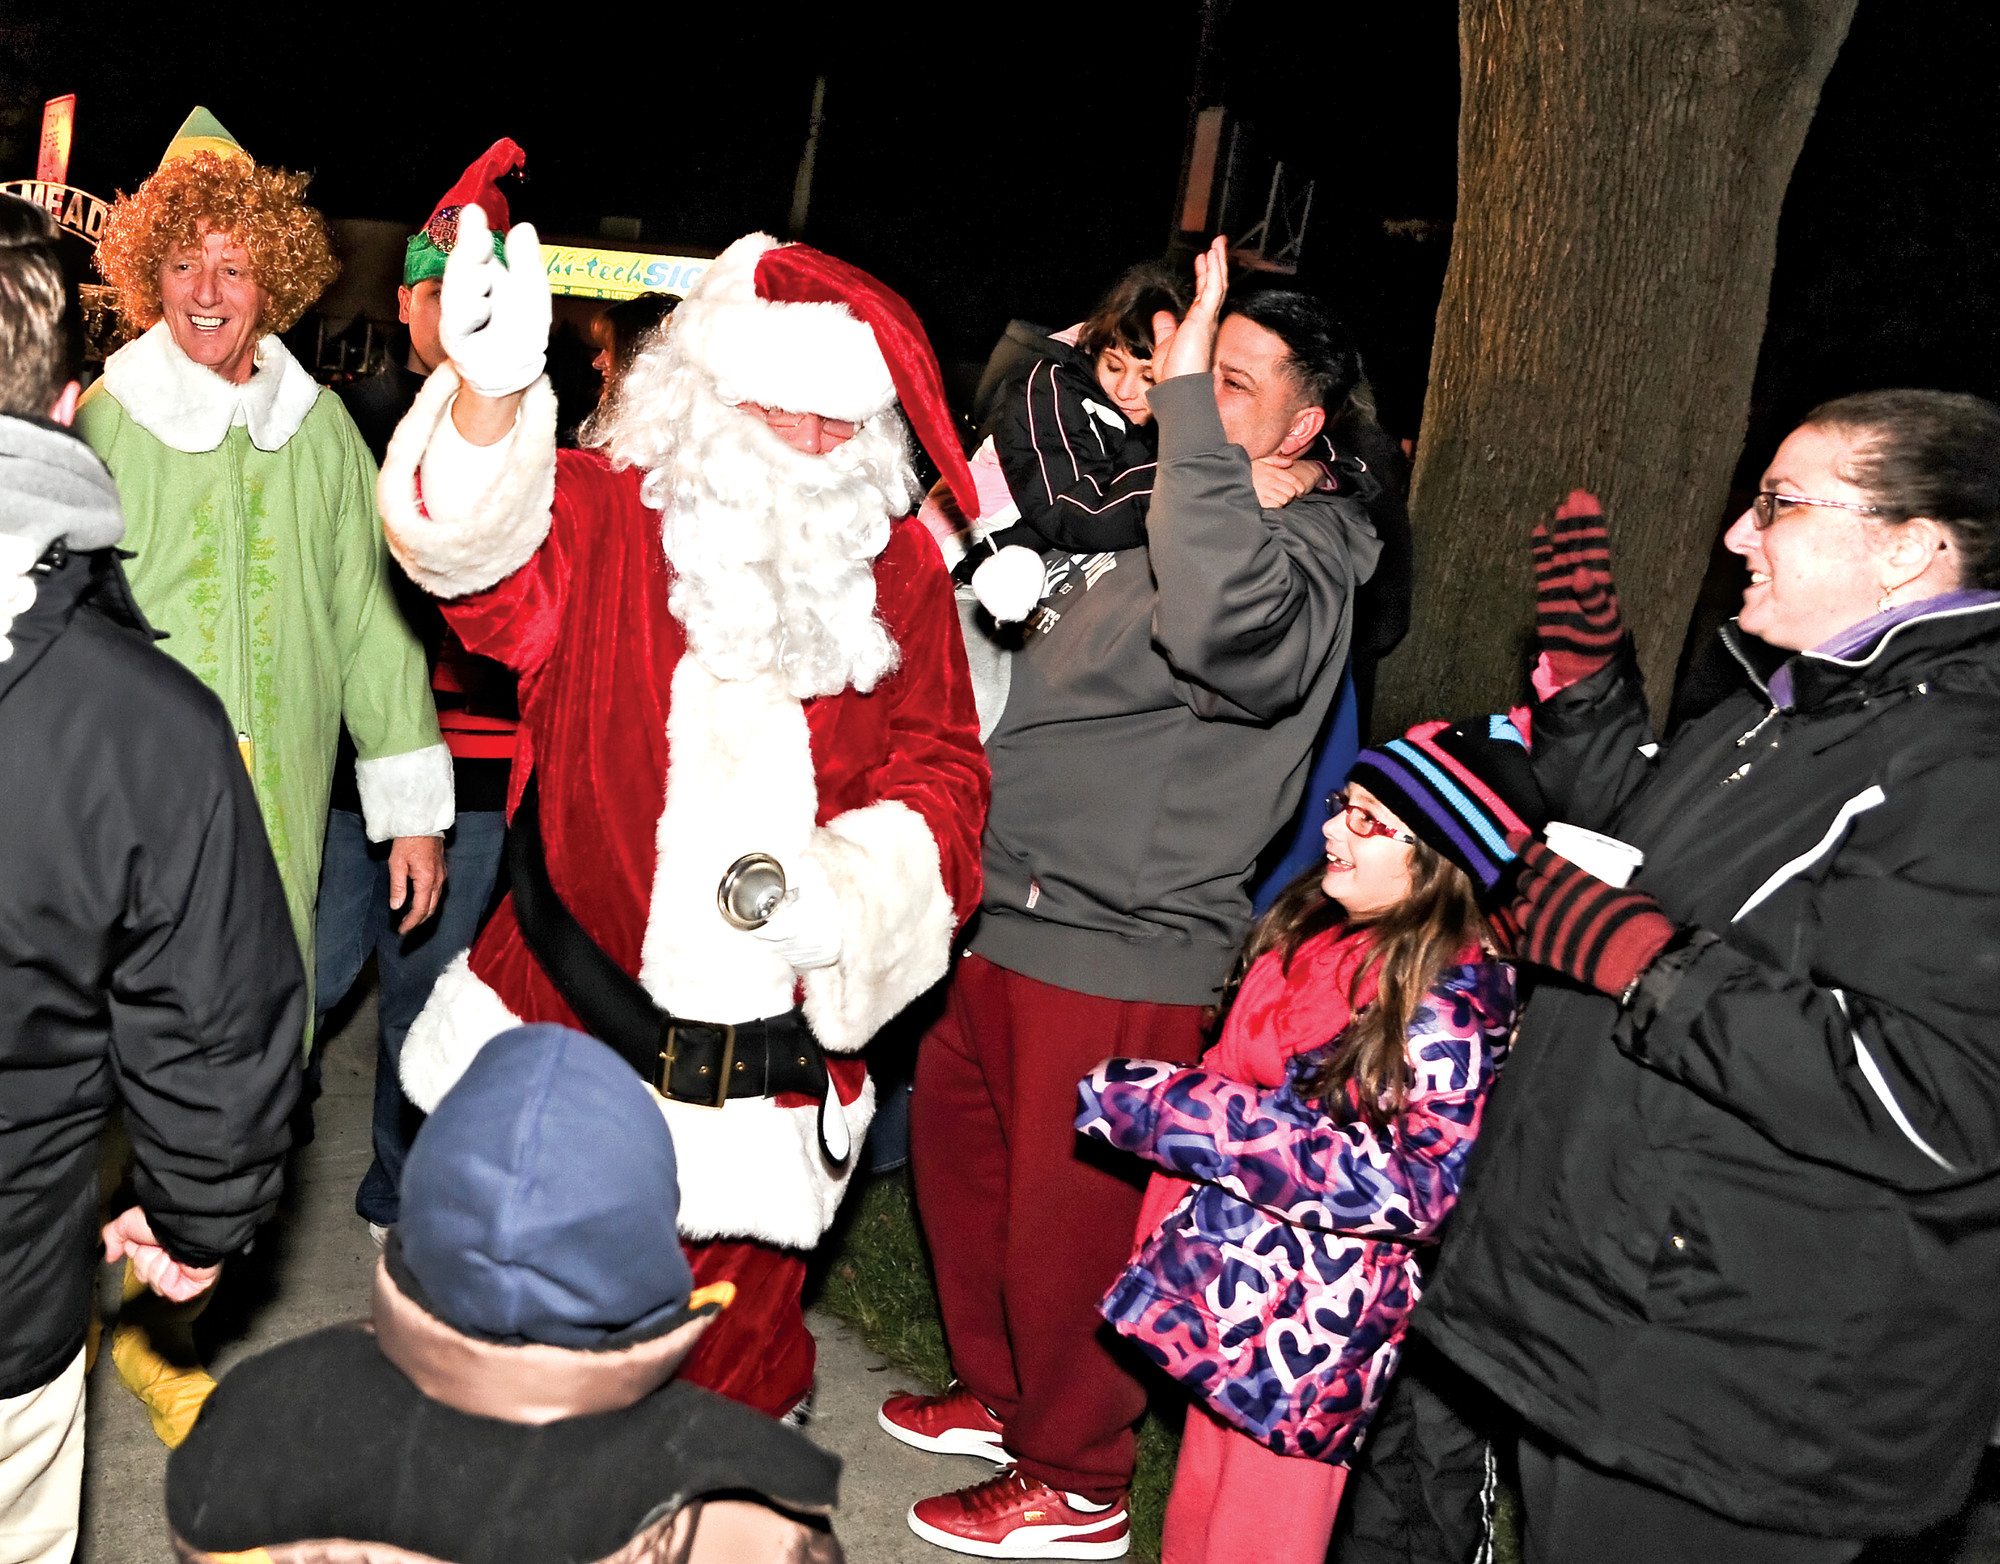 The arrival of a certain seasonal celebrity excited residents who attended the East Meadow Chamber of Commerce and Council of East Meadow Community Organizations’ holiday lighting last Thursday at Veterans Memorial Park.